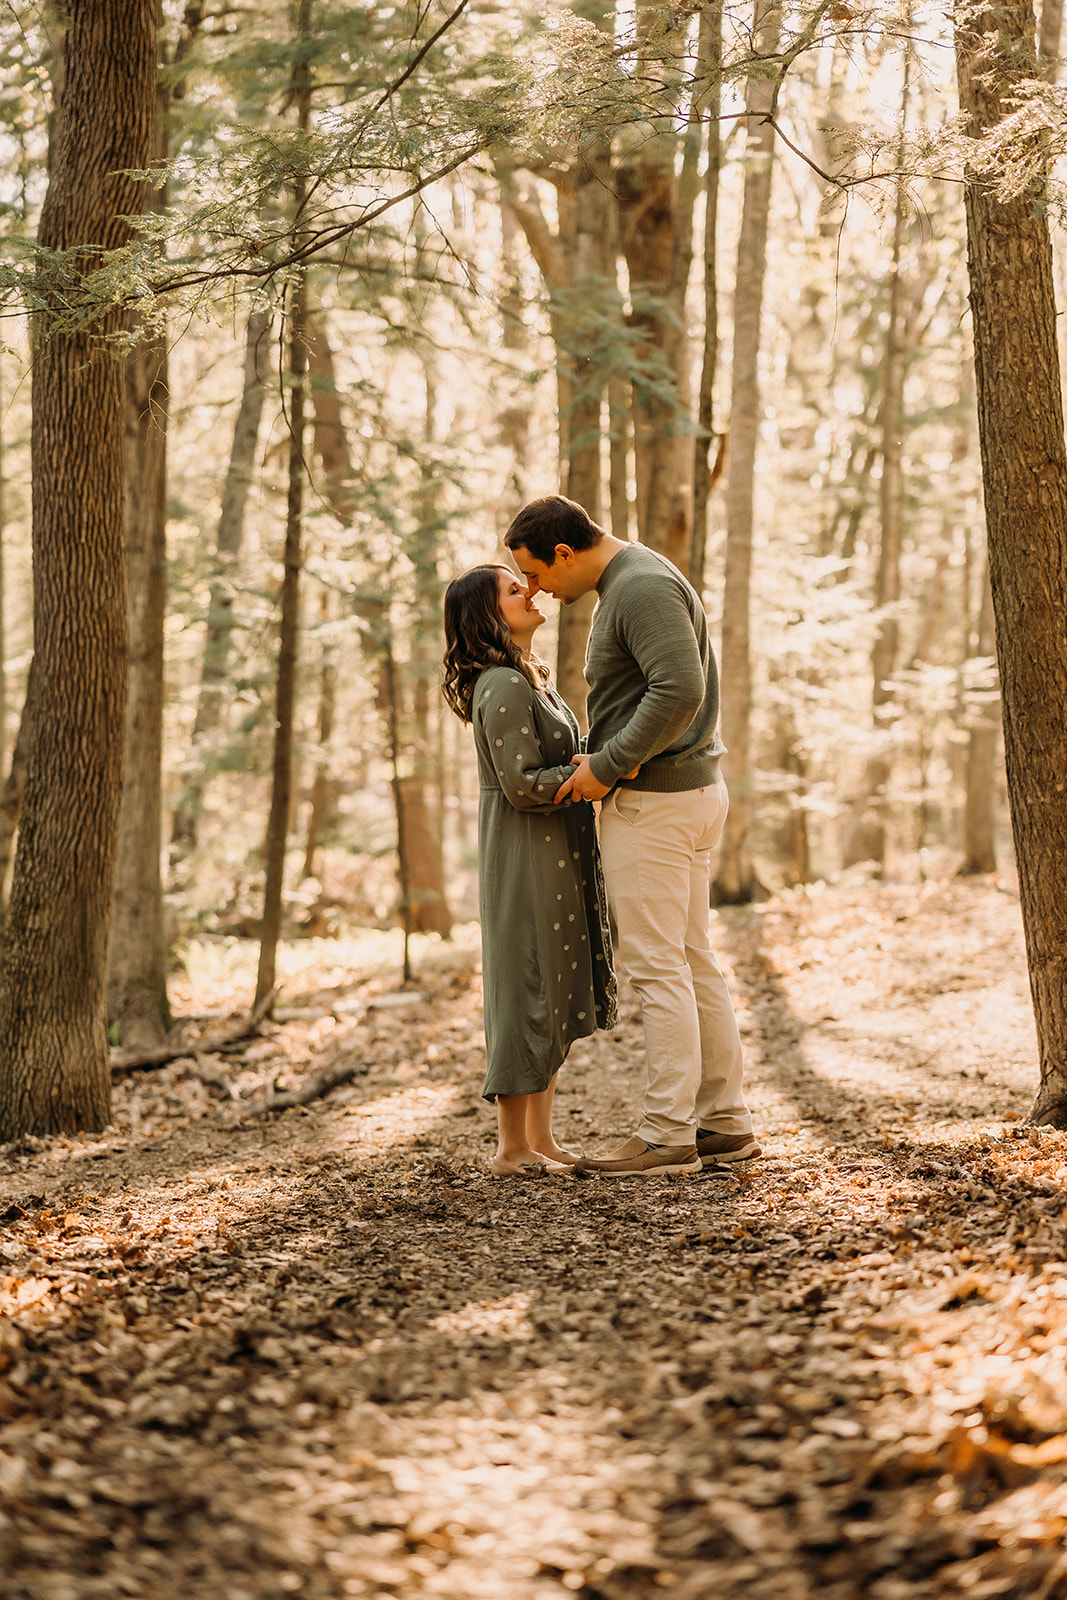 Beautiful husband and wife framed by the stunning outdoor scenery in a family photoshoot